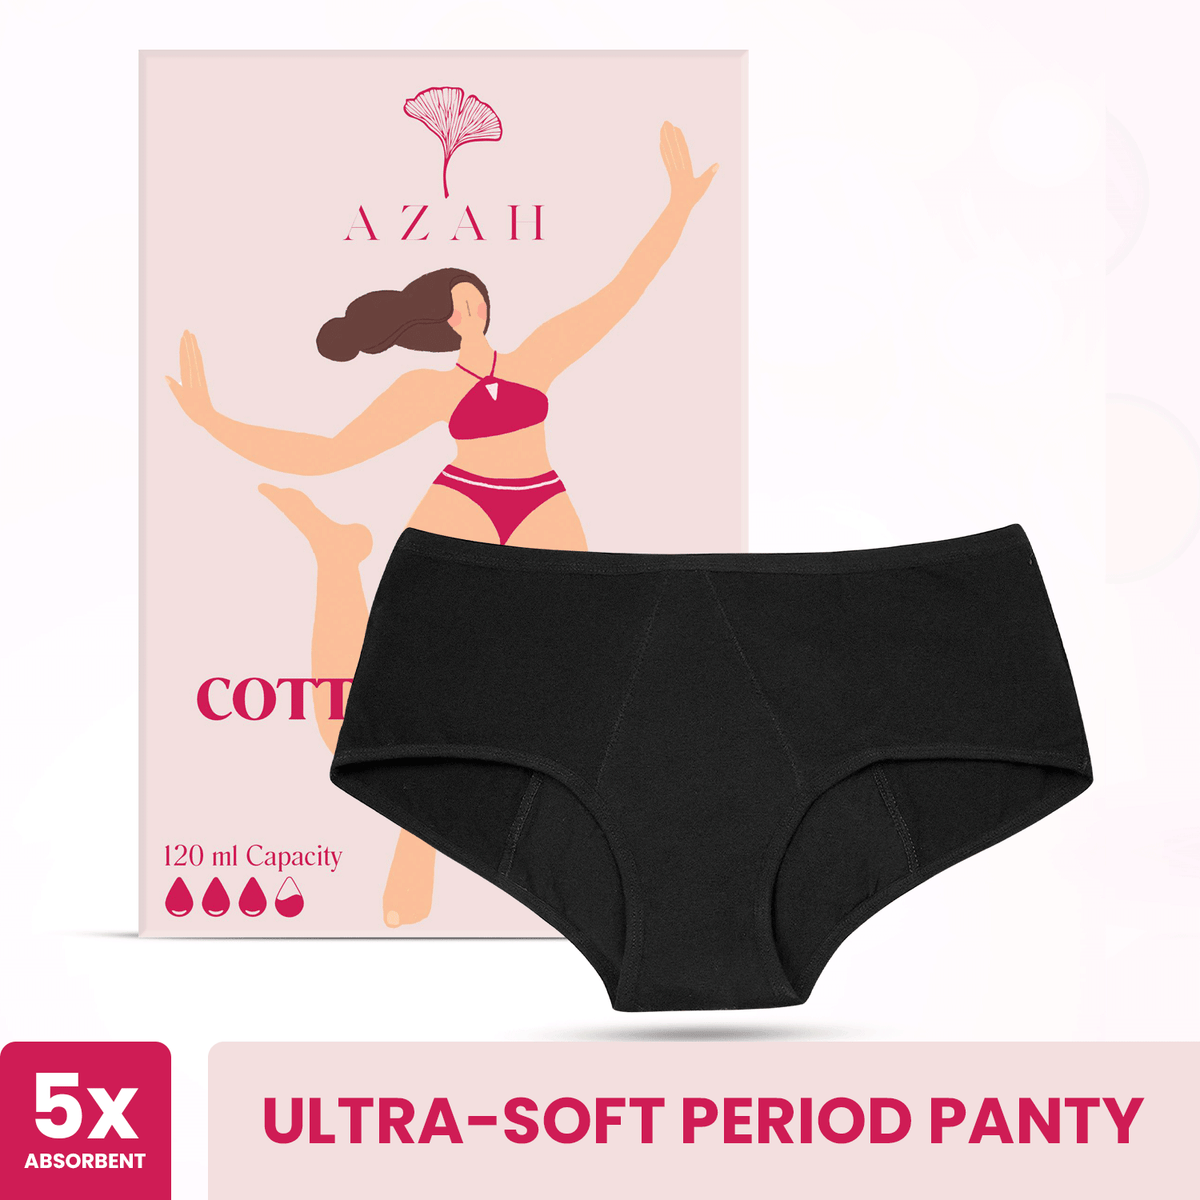 Period. by The Period Company The Light Absorbency Thong Period